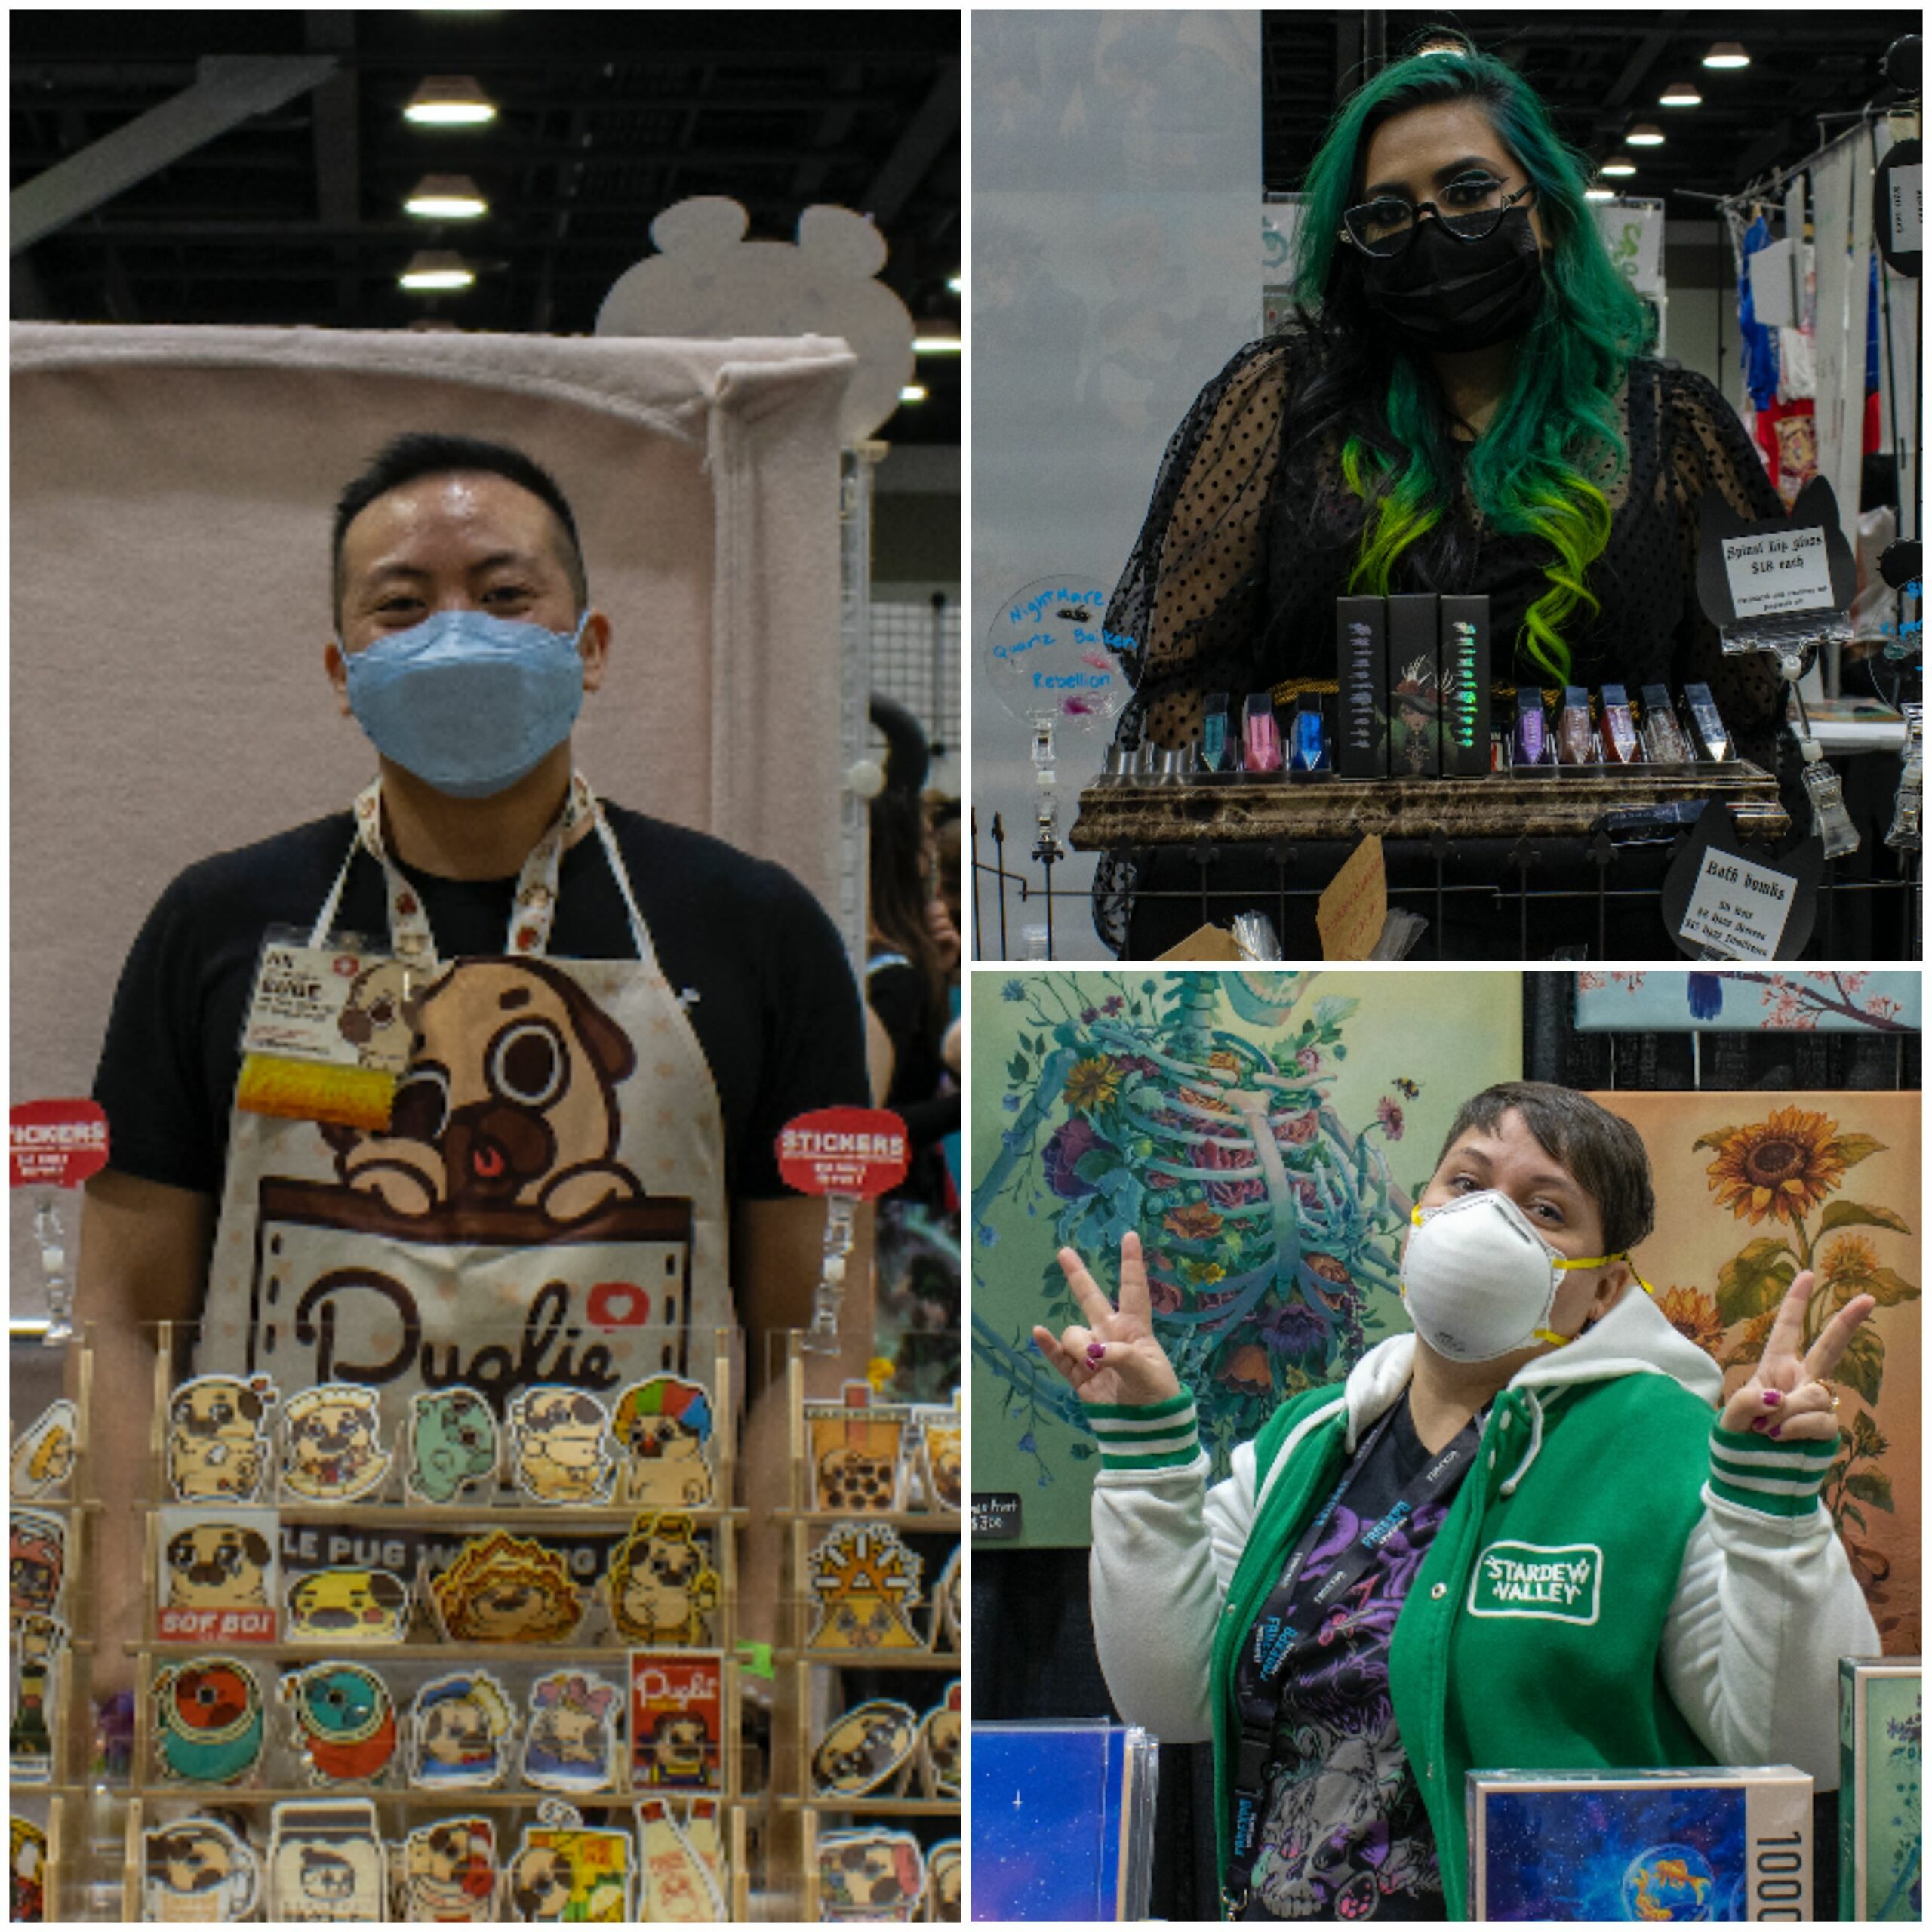 Collage featuring, from left to right, Ashi Reddy, Euge Leung, and Lisa LaRose